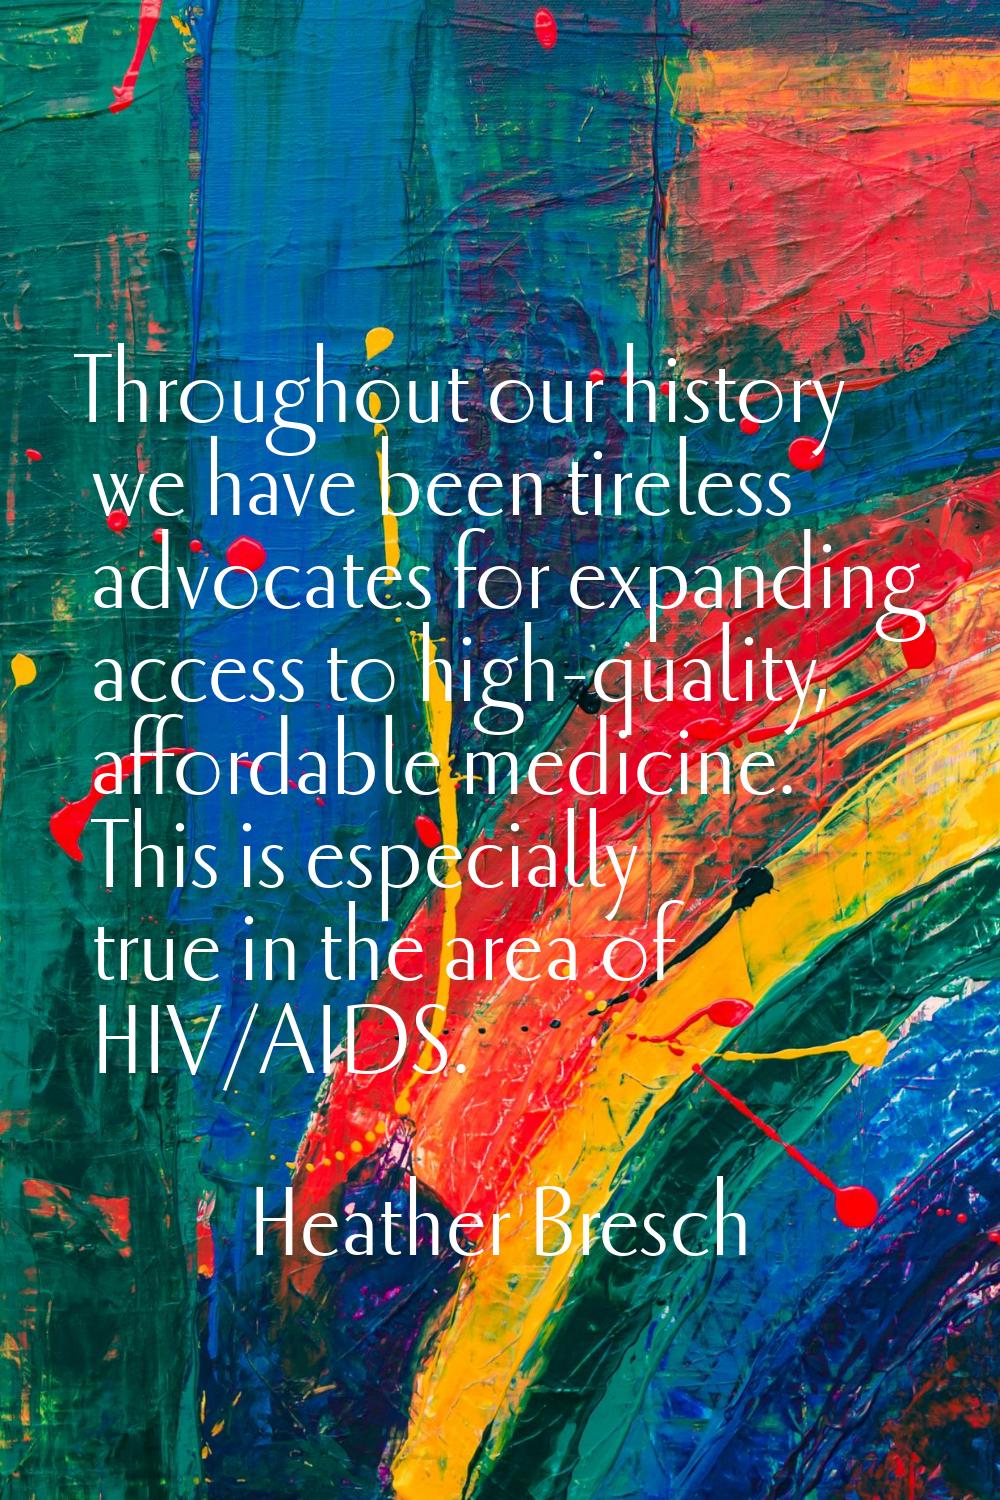 Throughout our history we have been tireless advocates for expanding access to high-quality, afford